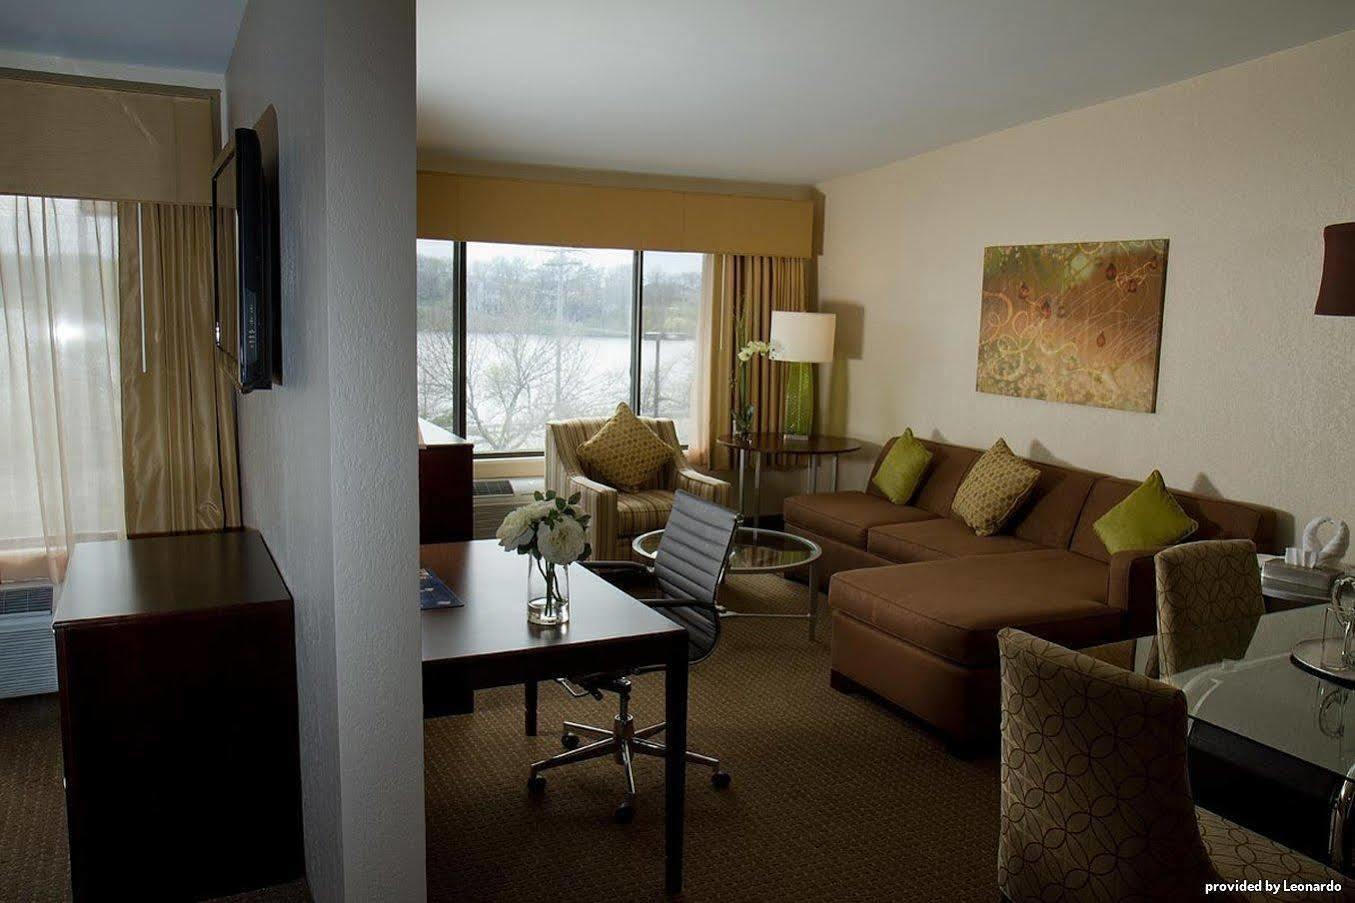 Antioch Hotel & Suites Room photo